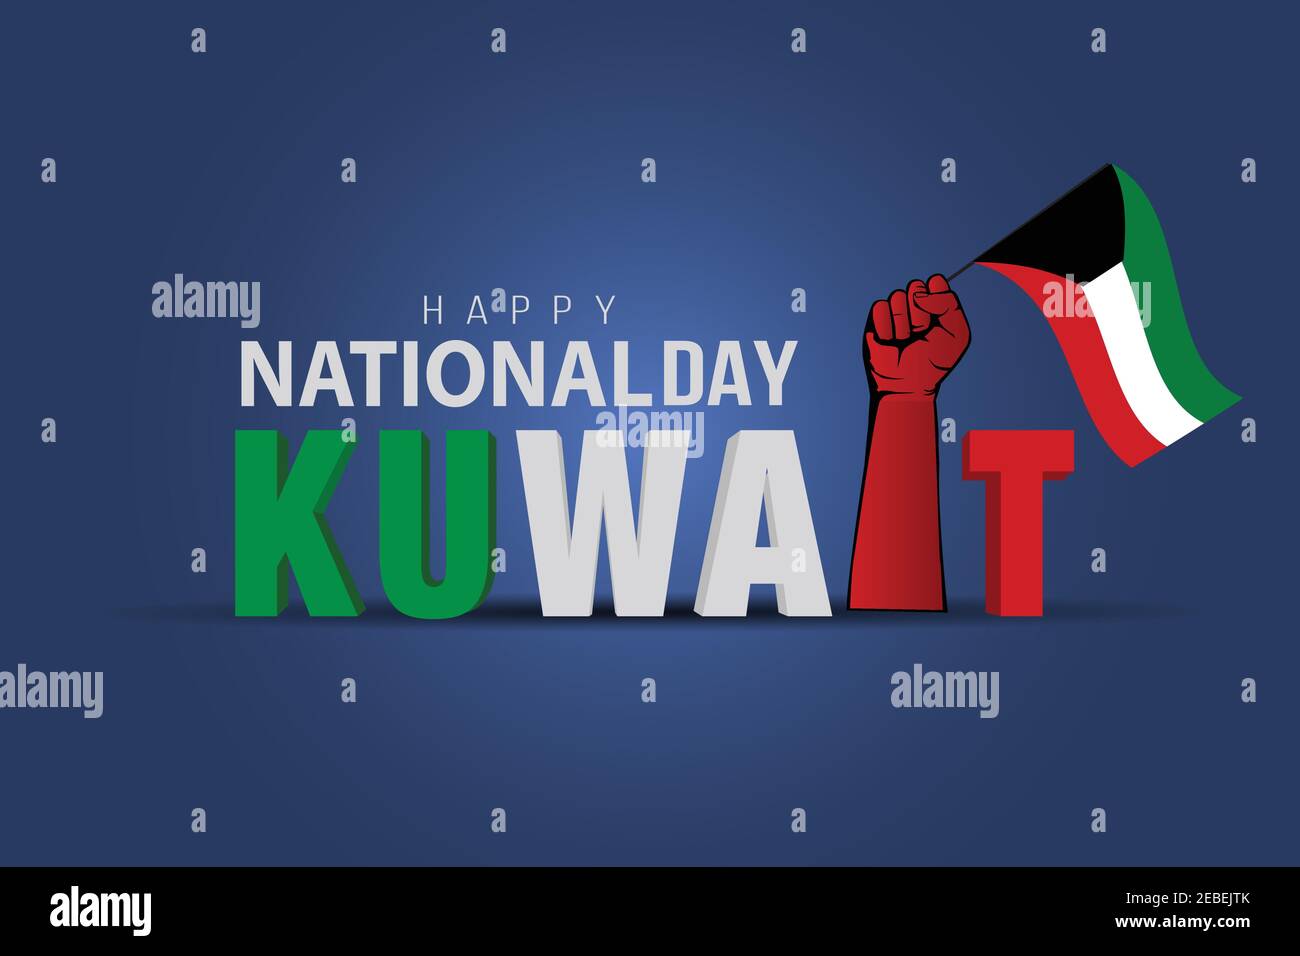 happy national day Kuwait holding hand with Kuwait flag. 3d letter vector illustration design Stock Vector